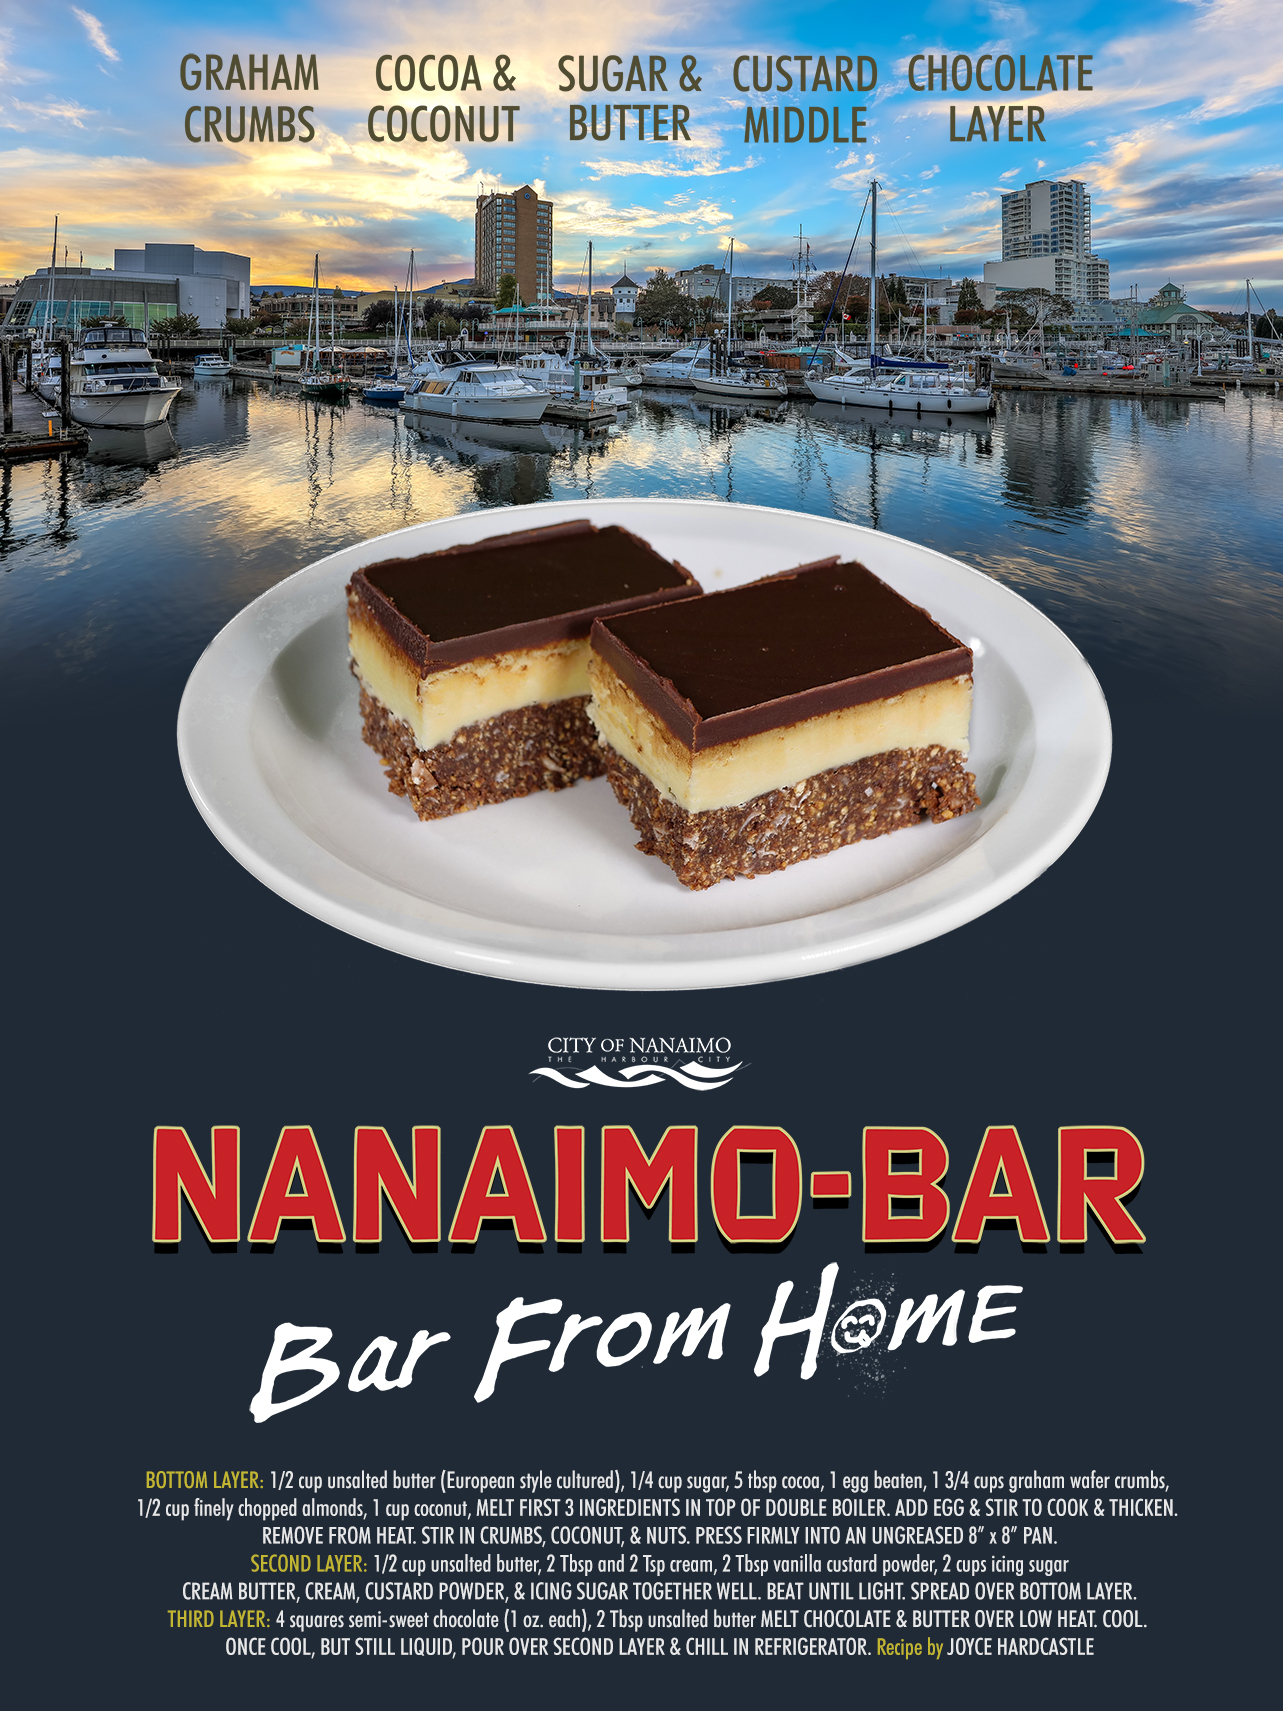 A fake movie poster showing the Nanaimo bar in front of our harbour